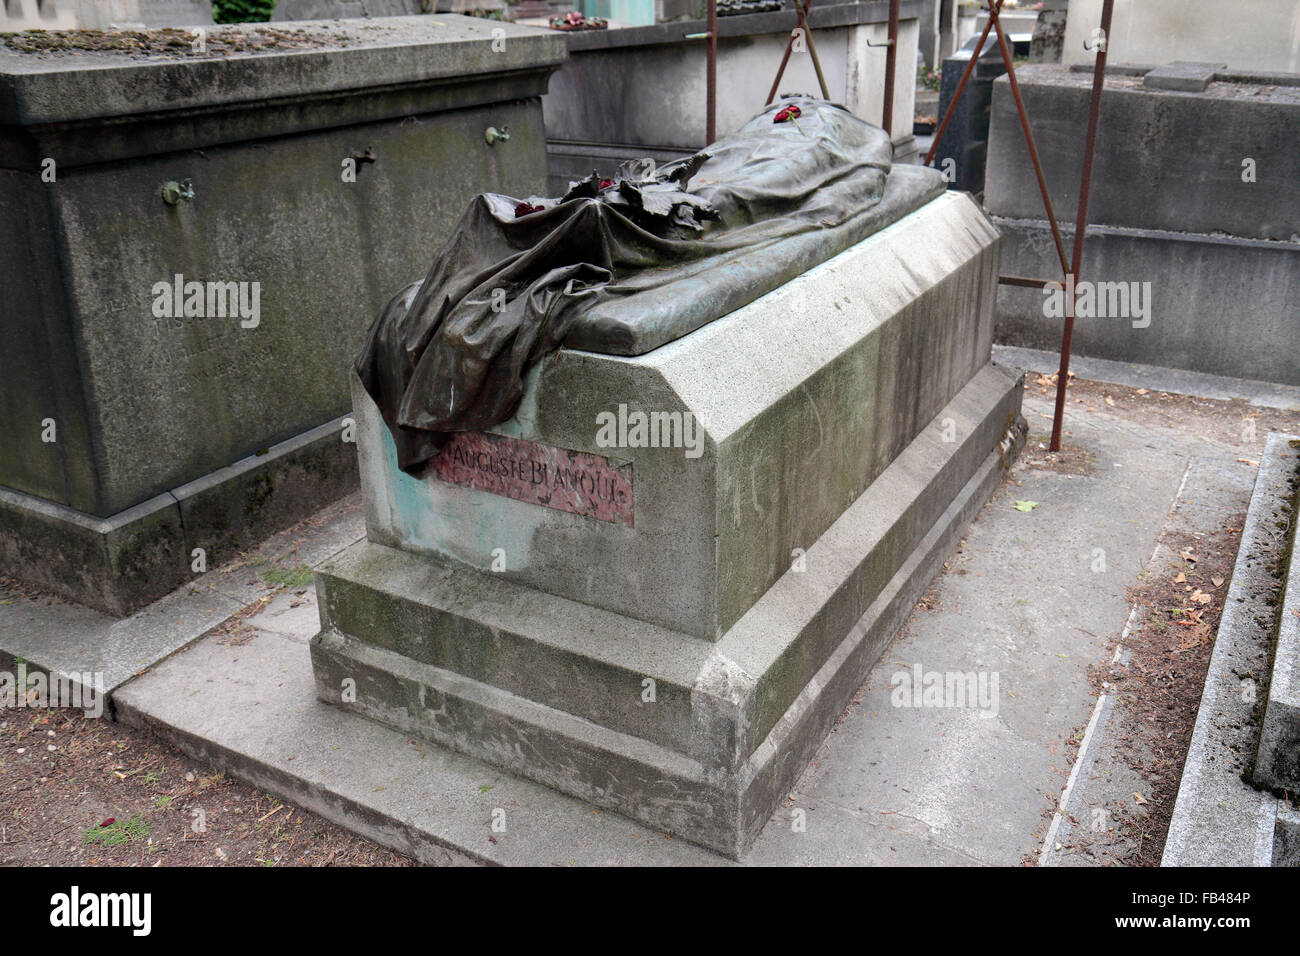 The grave of Louis Auguste Blanqui a French revolutionary socialist in the Père Lachaise Cemetery, Paris, France. Stock Photo